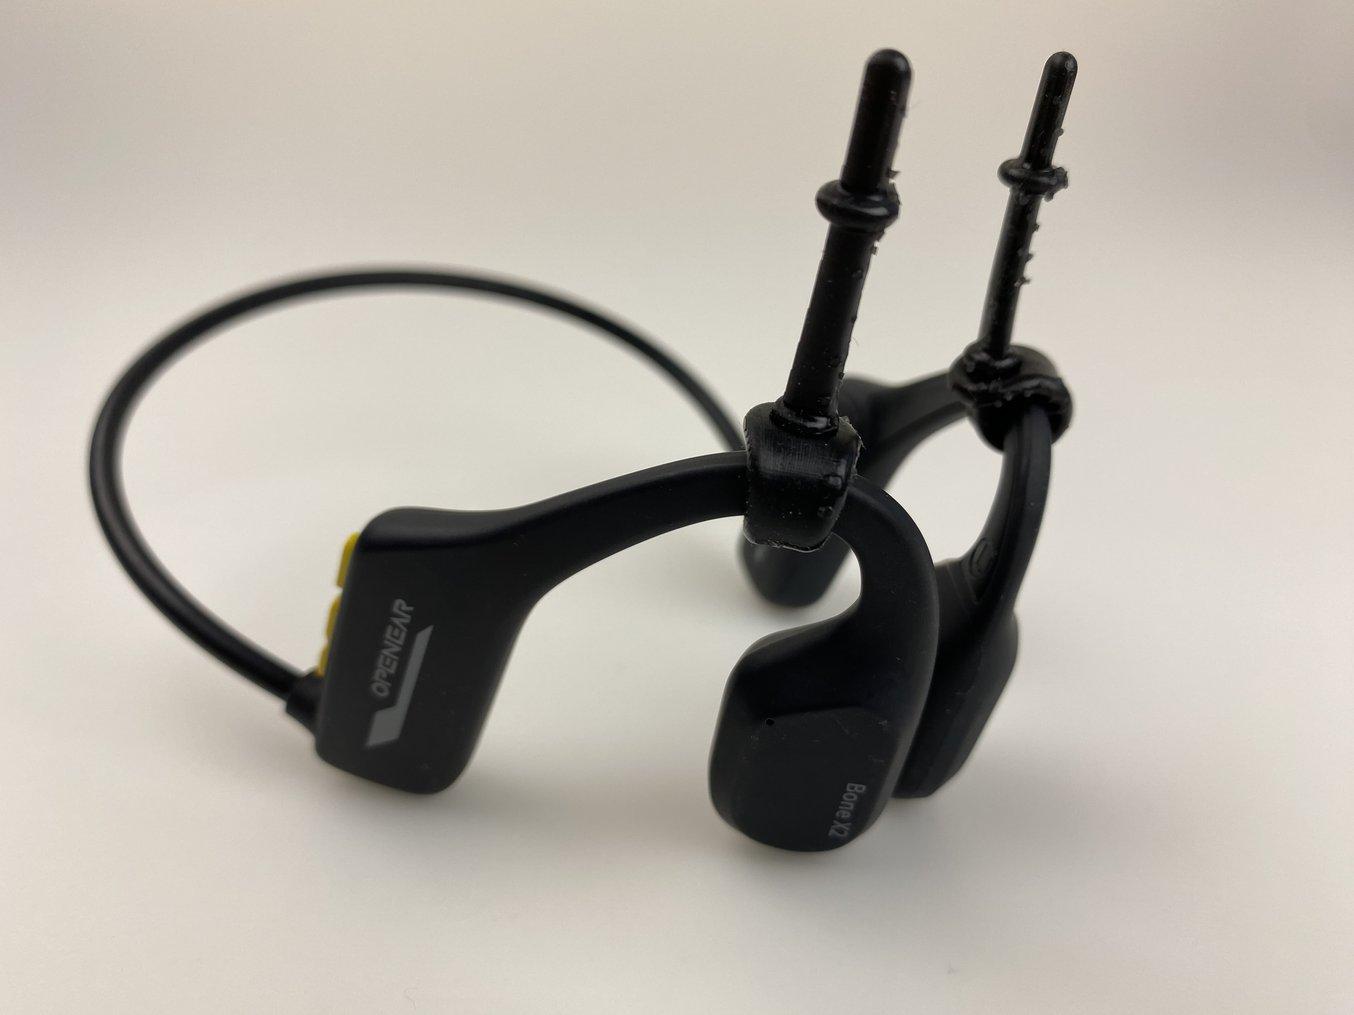 The team developed a small silicone add-on to secure the headset and give it extra stability.